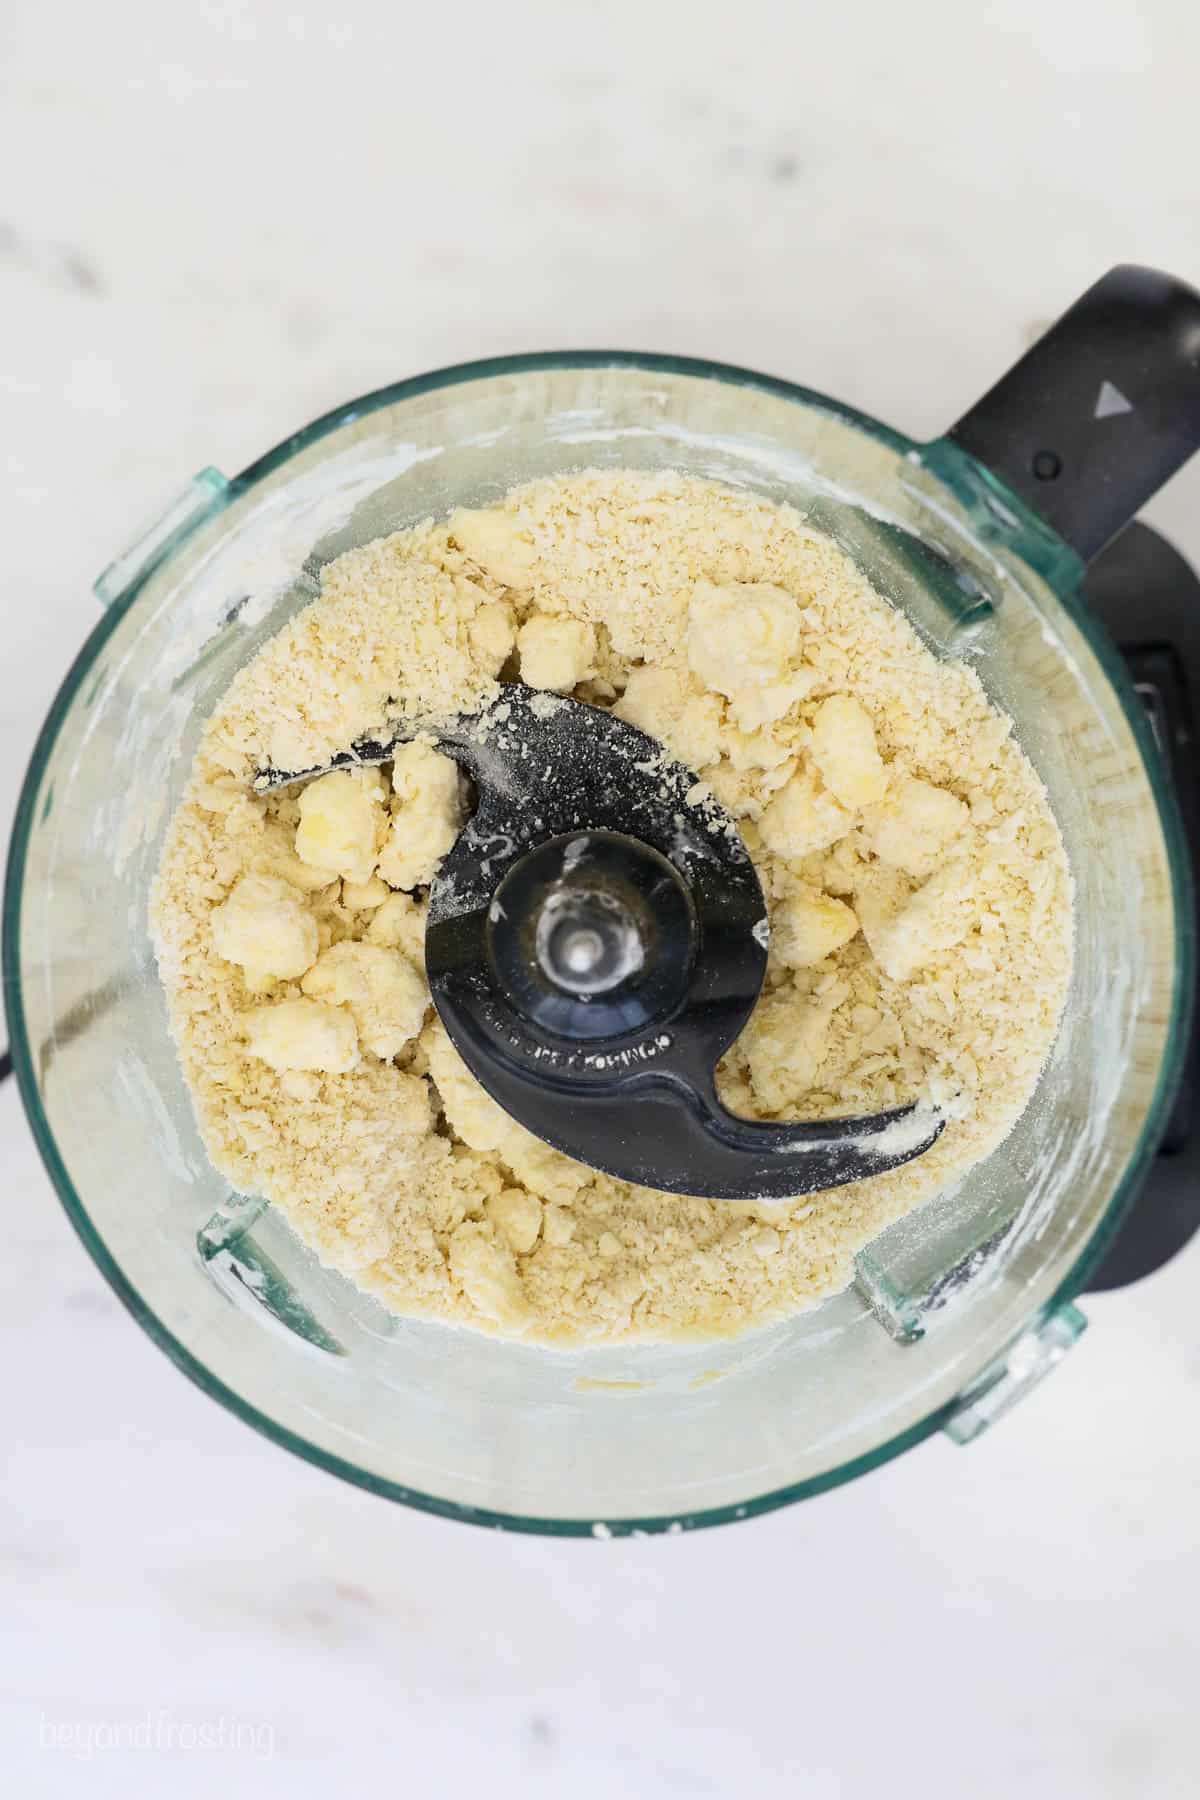 An egg and vinegar being mixed with the rest of the dough ingredients inside of a food processor